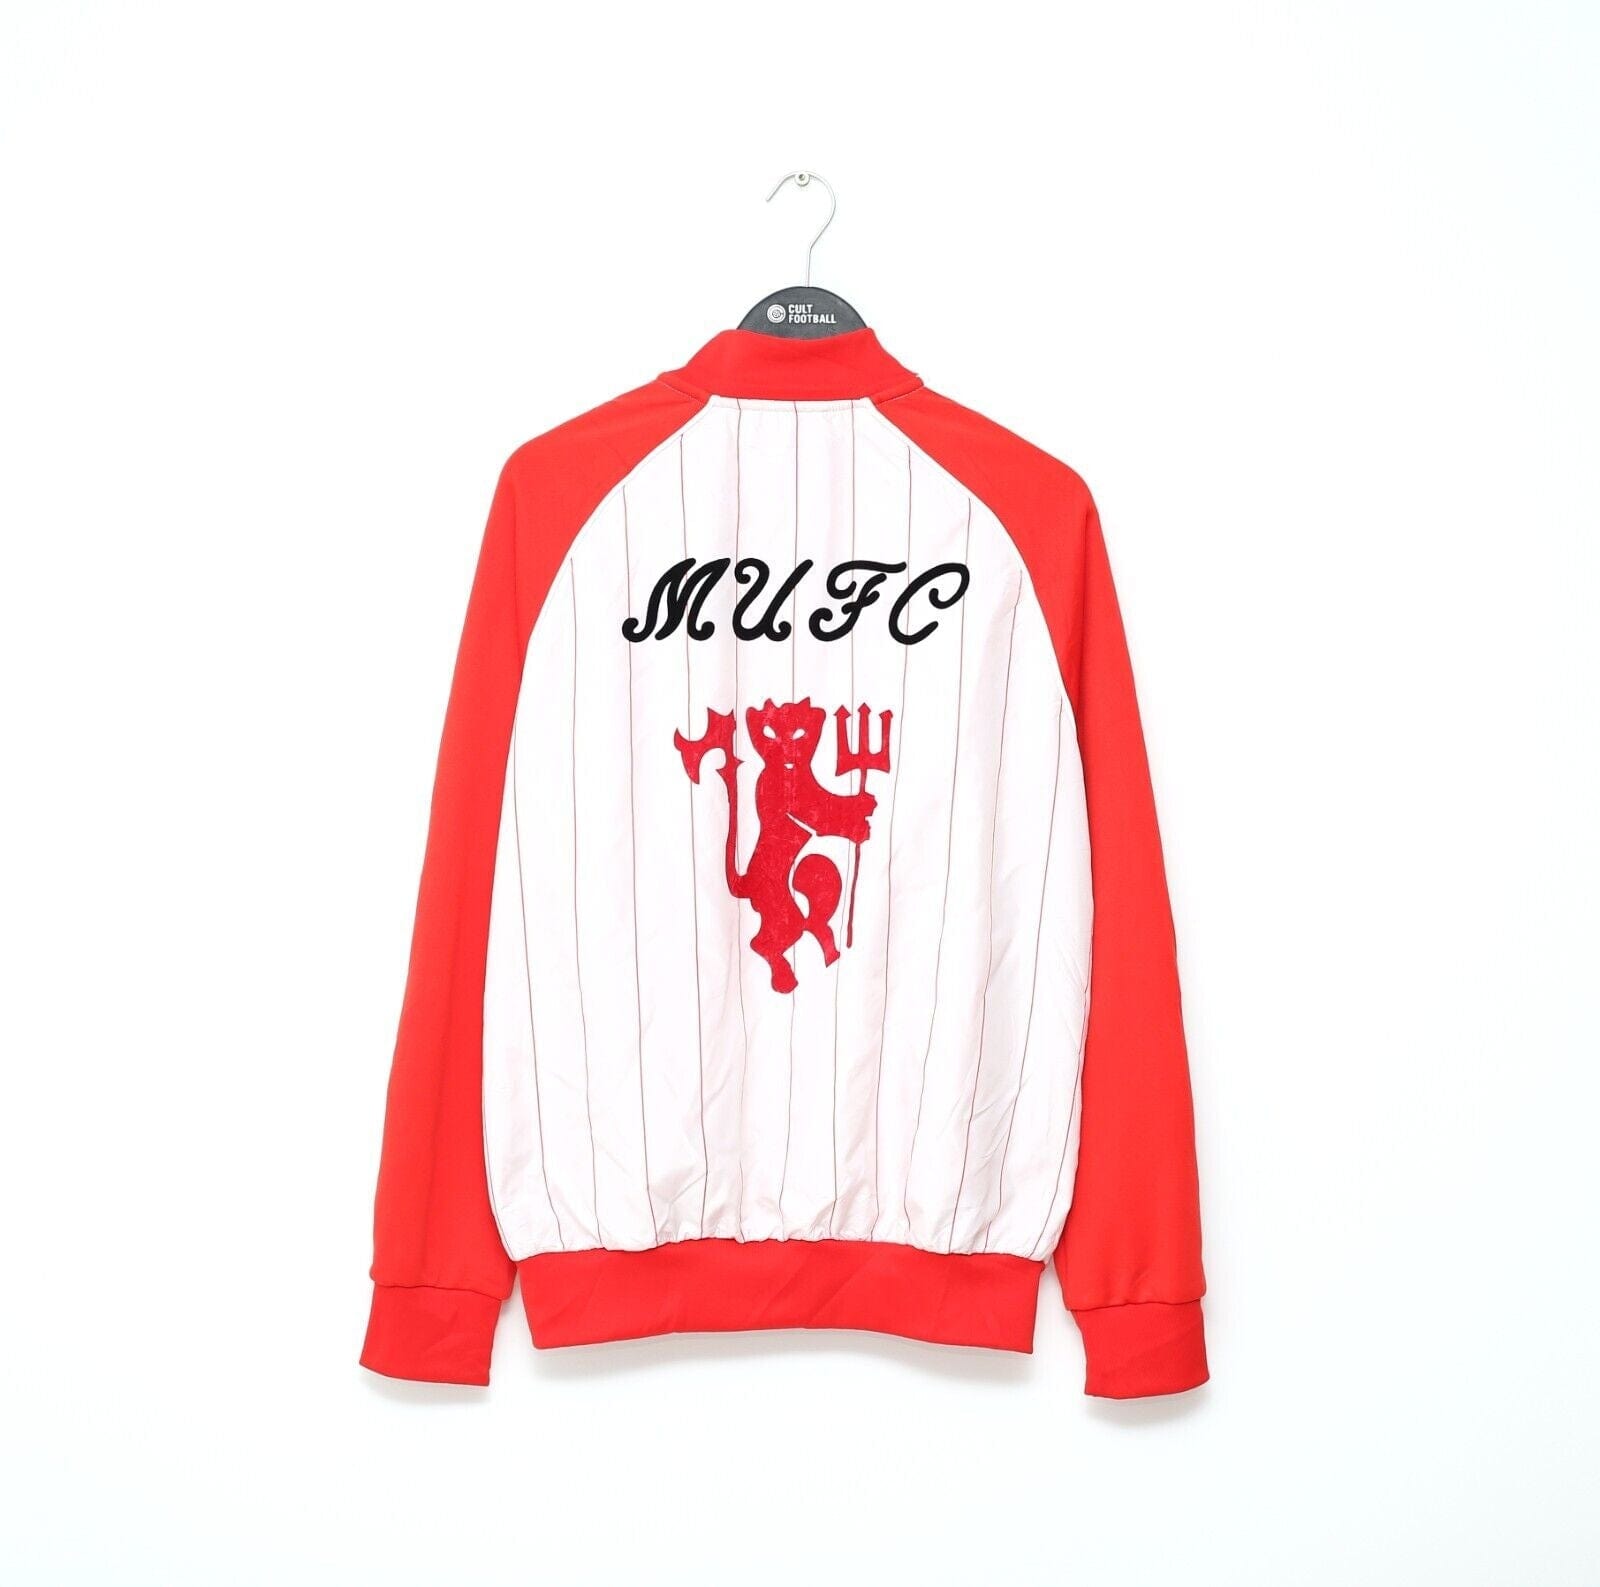 1980's Style MANCHESTER UNITED adidas Originals Football Track Top Jacket (M/L)